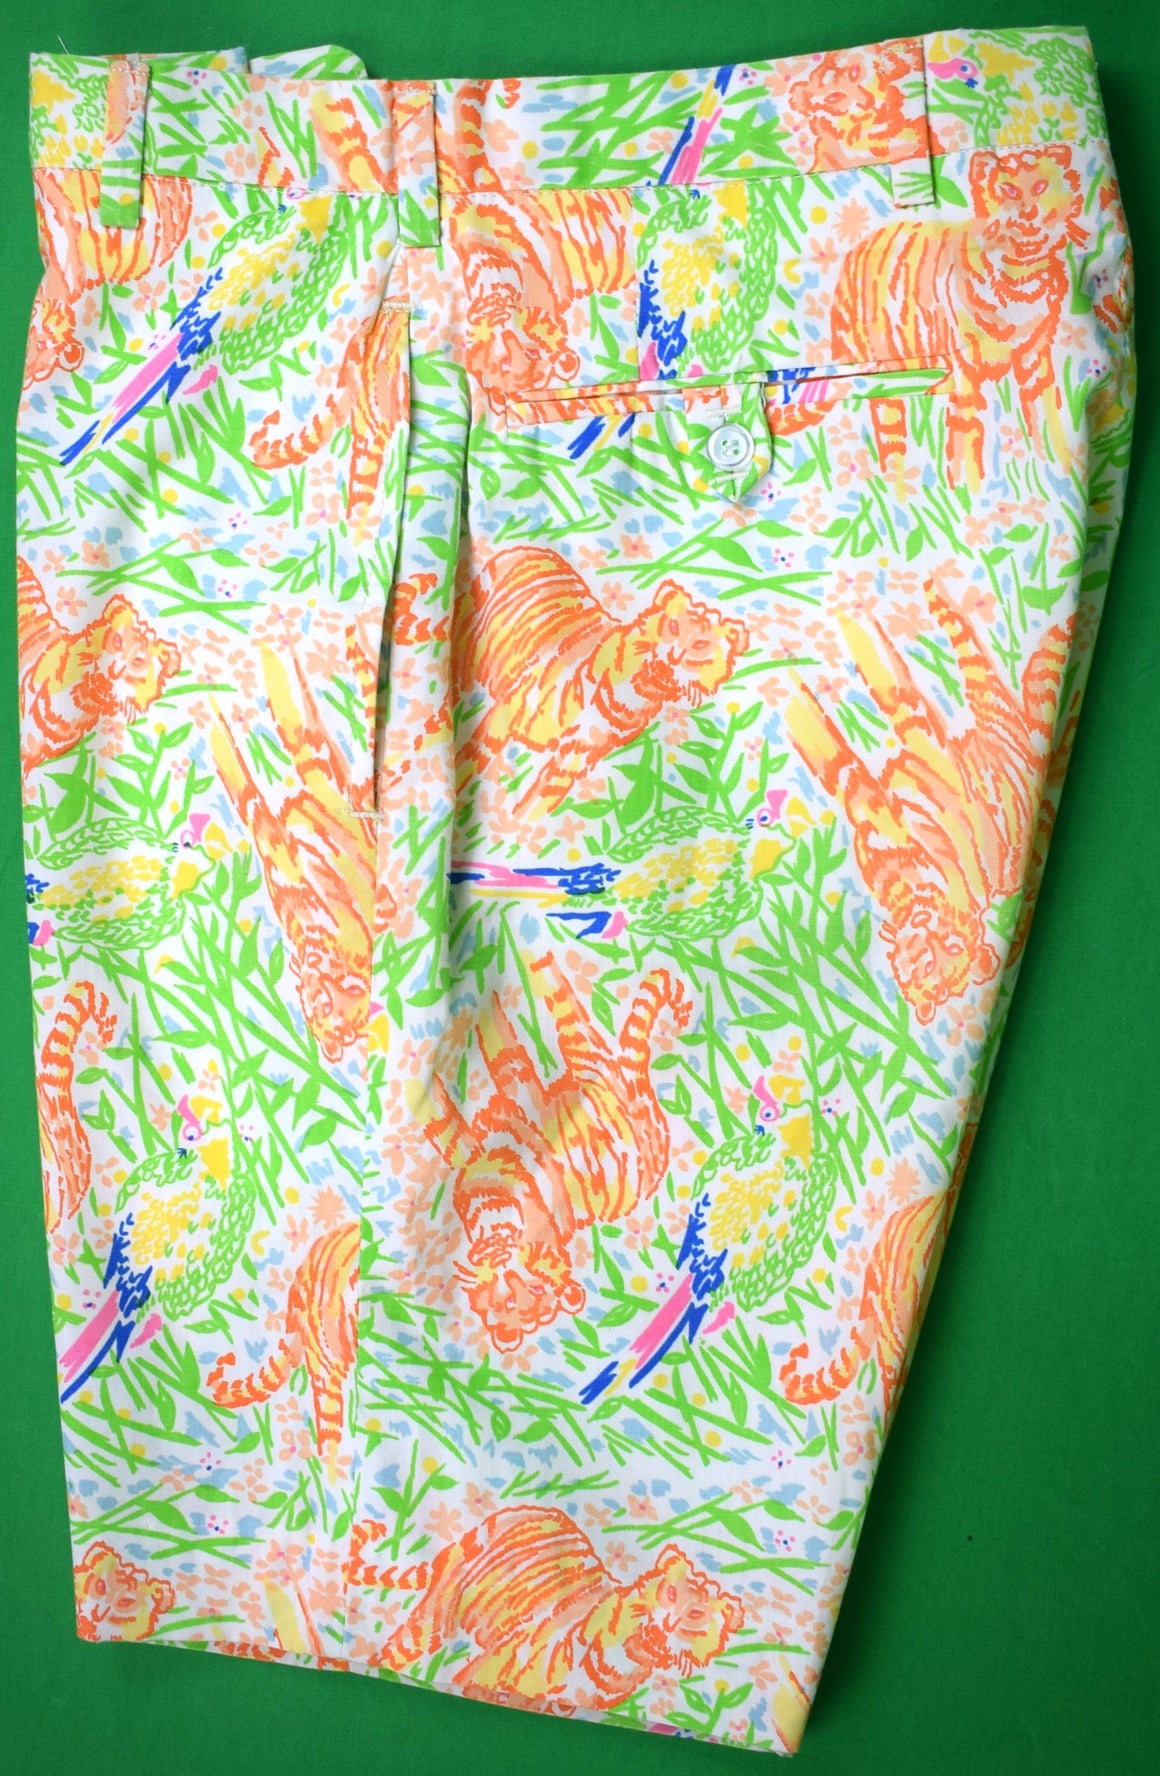 "O'Connell's x Lilly Pulitzer Tiger Tropical Print Bermuda GT Shorts" Sz 32